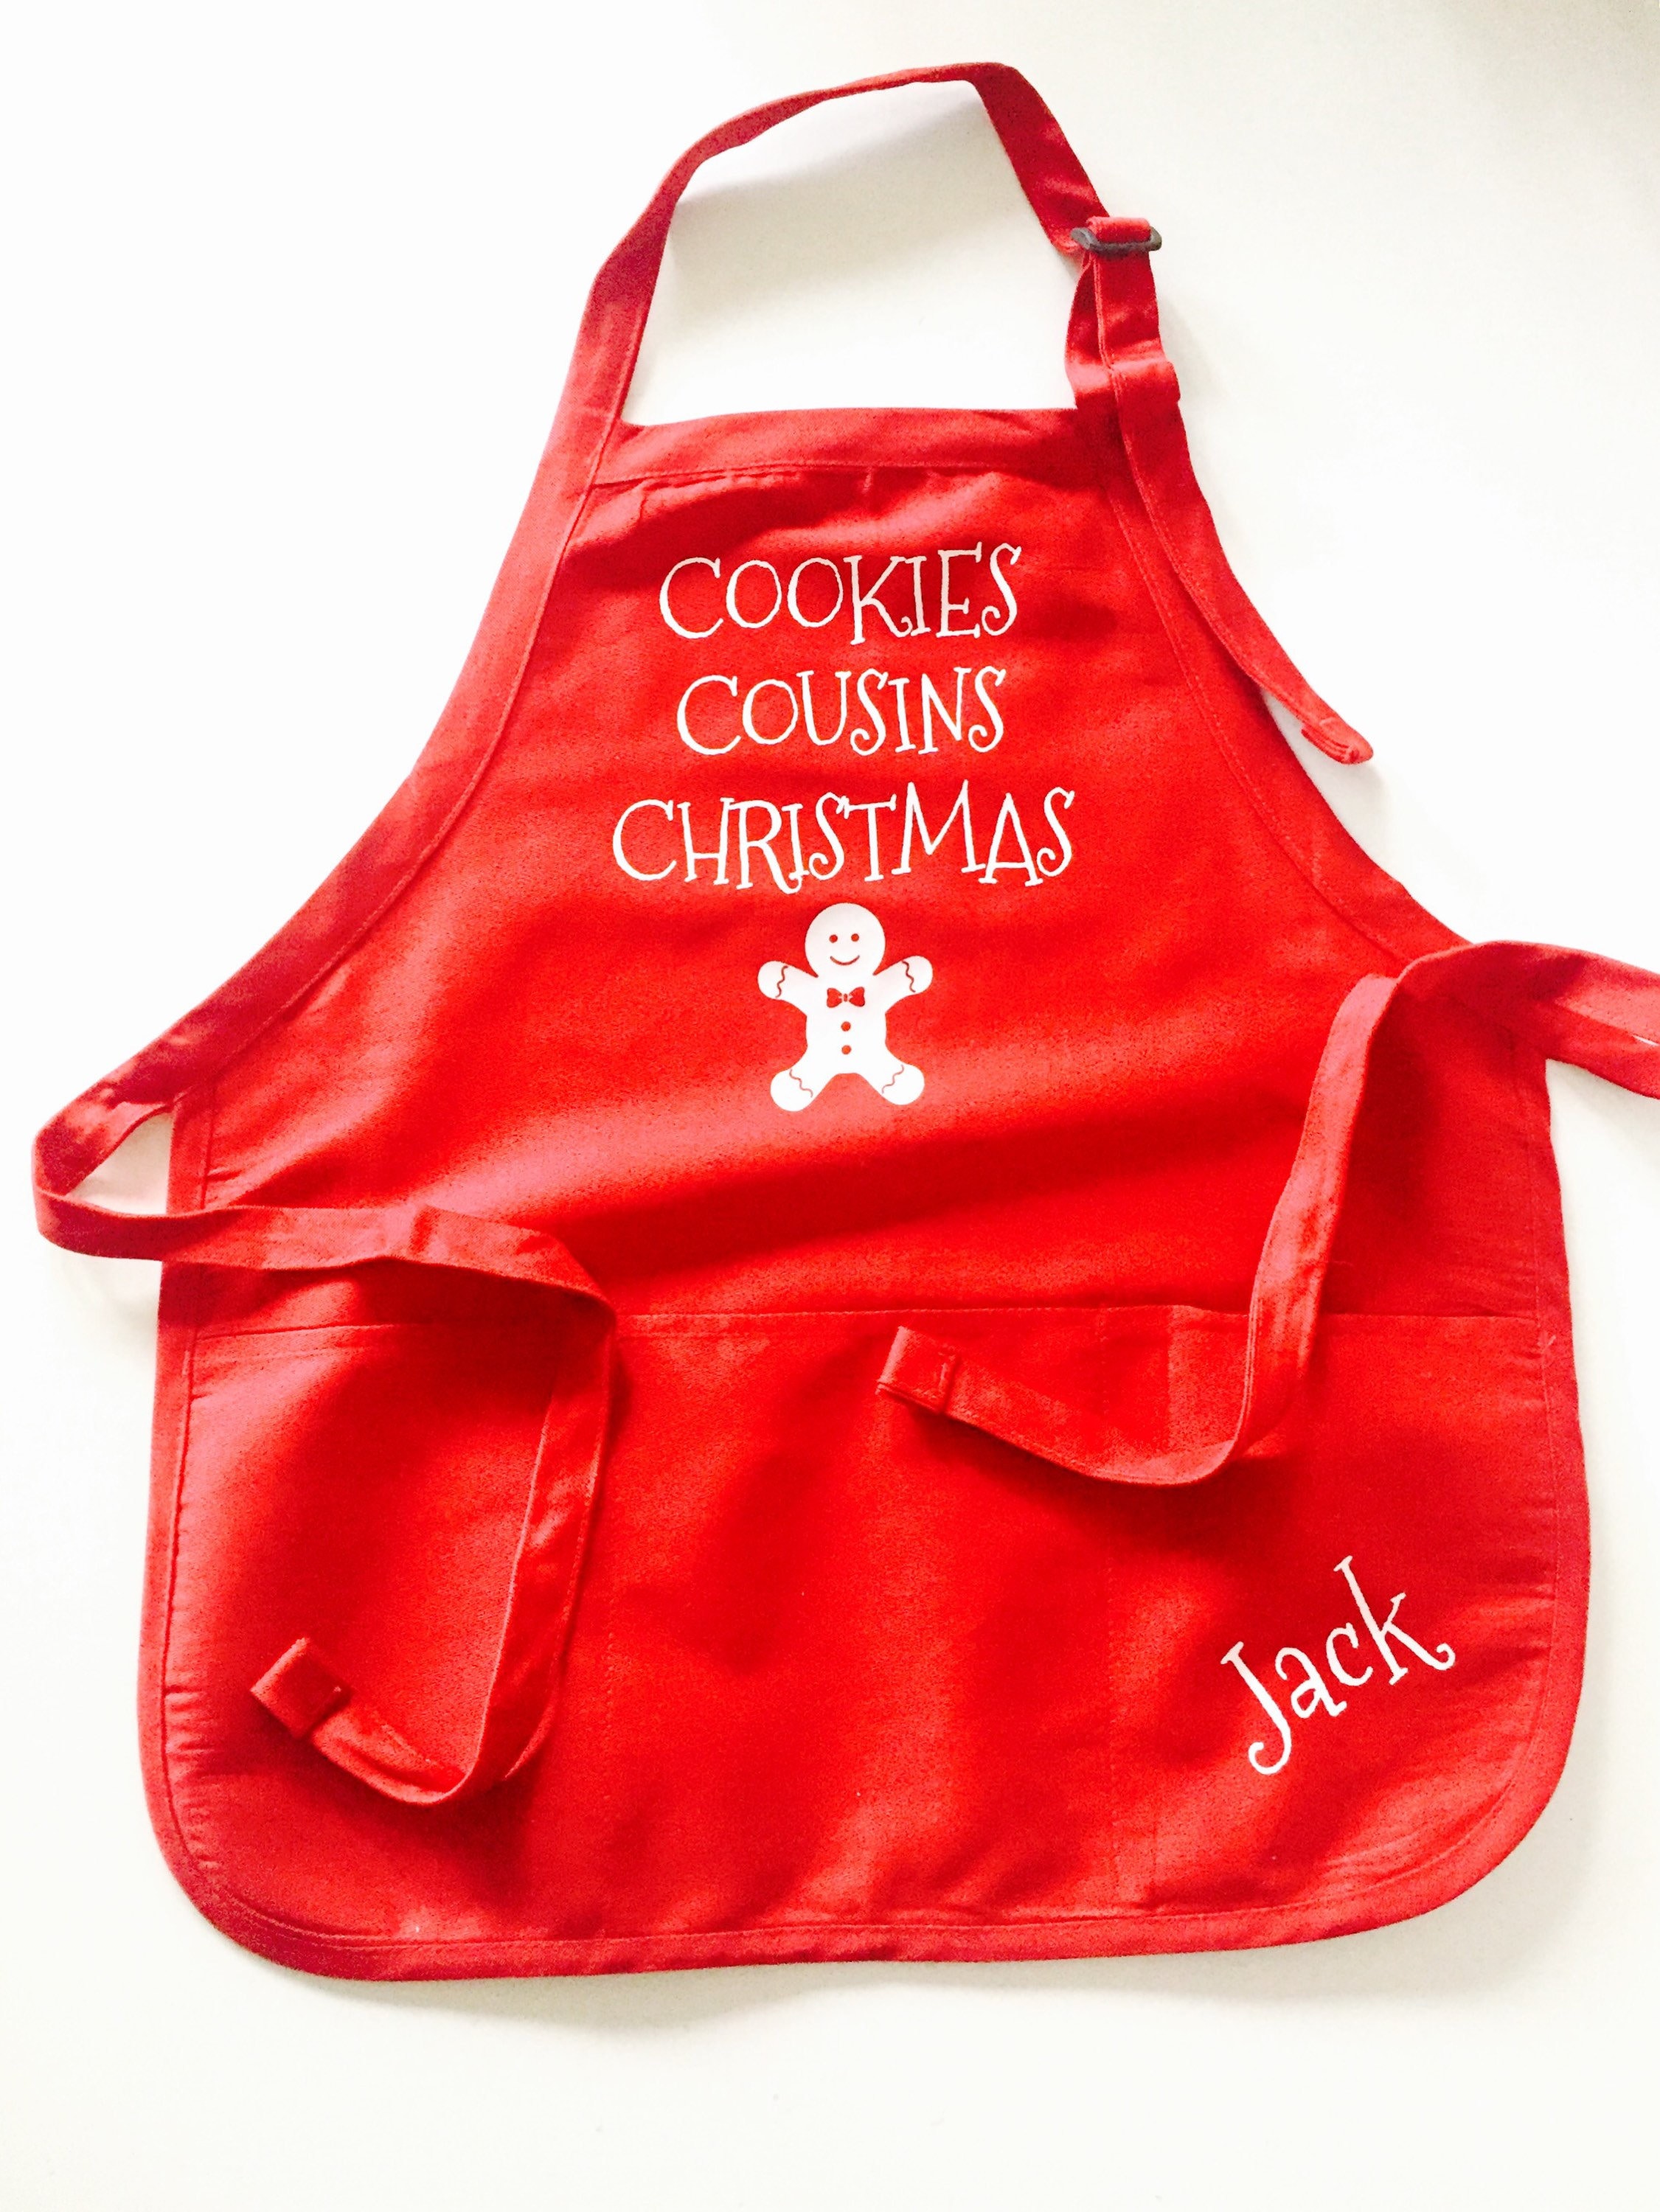 Cookie Taster Christmas Child Apron 20-Inch